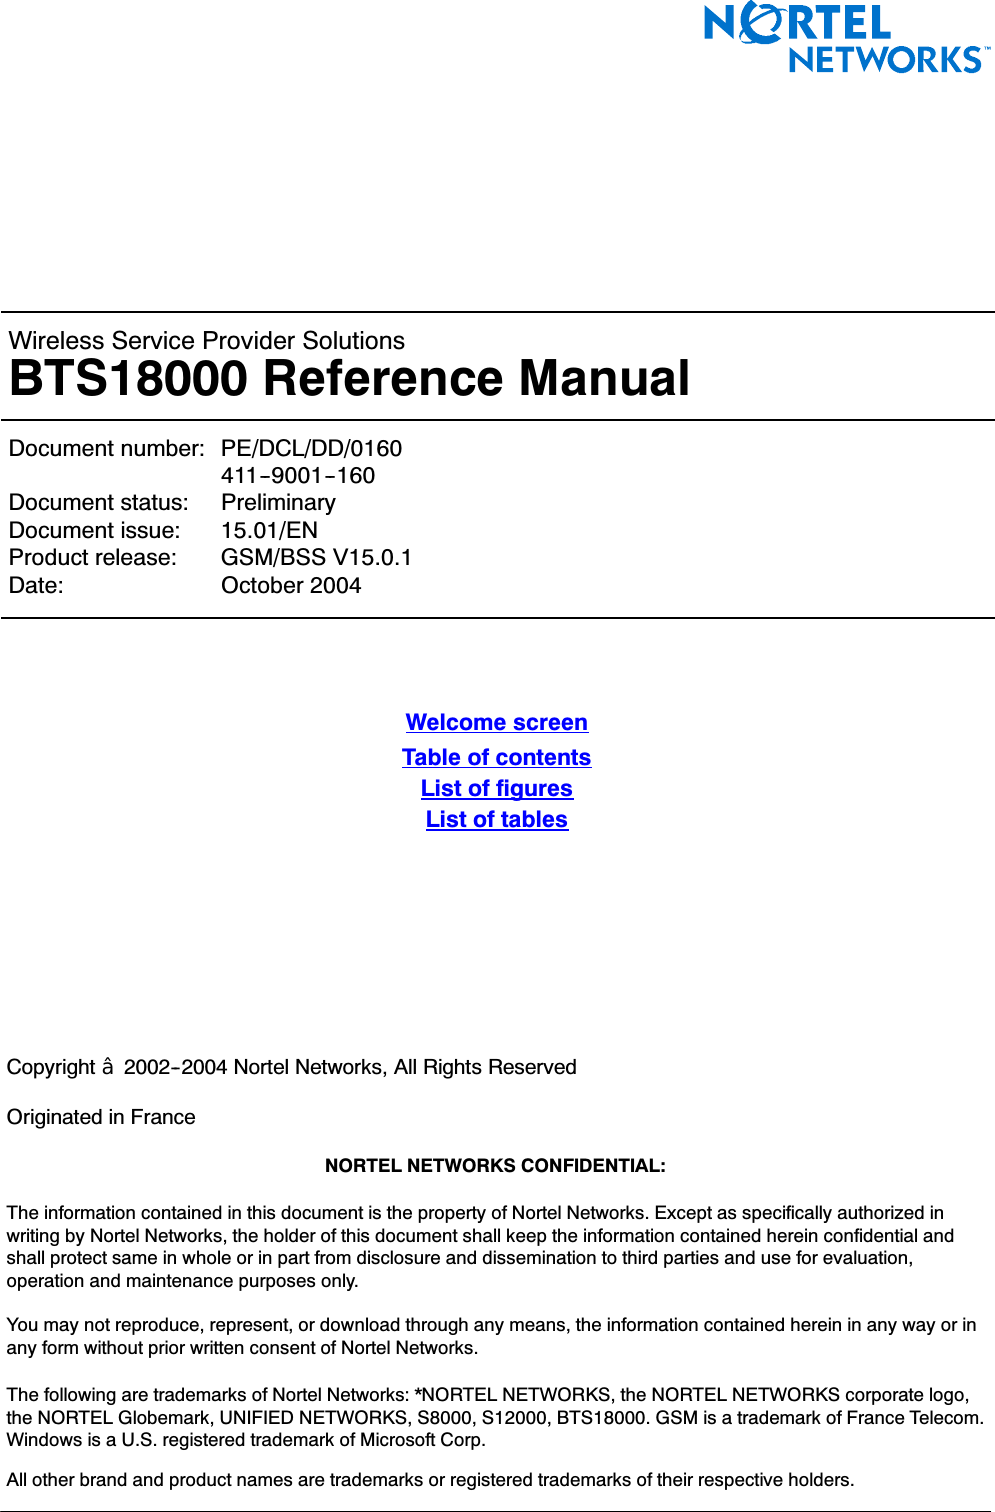 &lt; 142 &gt; : BTS18000 Reference ManualWireless Service Provider SolutionsBTS18000 Reference ManualDocument number: PE/DCL/DD/0160411--9001--160Document status: PreliminaryDocument issue: 15.01/ENProduct release: GSM/BSS V15.0.1Date: October 2004Welcome screenTable of contentsList of figuresList of tablesCopyright ¤2002--2004 Nortel Networks, All Rights ReservedOriginated in FranceNORTEL NETWORKS CONFIDENTIAL:The information contained in this document is the property of Nortel Networks. Except as specifically authorized inwriting by Nortel Networks, the holder of this document shall keep the information contained herein confidential andshall protect same in whole or in part from disclosure and dissemination to third parties and use for evaluation,operation and maintenance purposes only.You may not reproduce, represent, or download through any means, the information contained herein in any way or inany form without prior written consent of Nortel Networks.The following are trademarks of Nortel Networks: *NORTEL NETWORKS, the NORTEL NETWORKS corporate logo,the NORTEL Globemark, UNIFIED NETWORKS, S8000, S12000, BTS18000. GSM is a trademark of France Telecom.Windows is a U.S. registered trademark of Microsoft Corp.All other brand and product names are trademarks or registered trademarks of their respective holders.